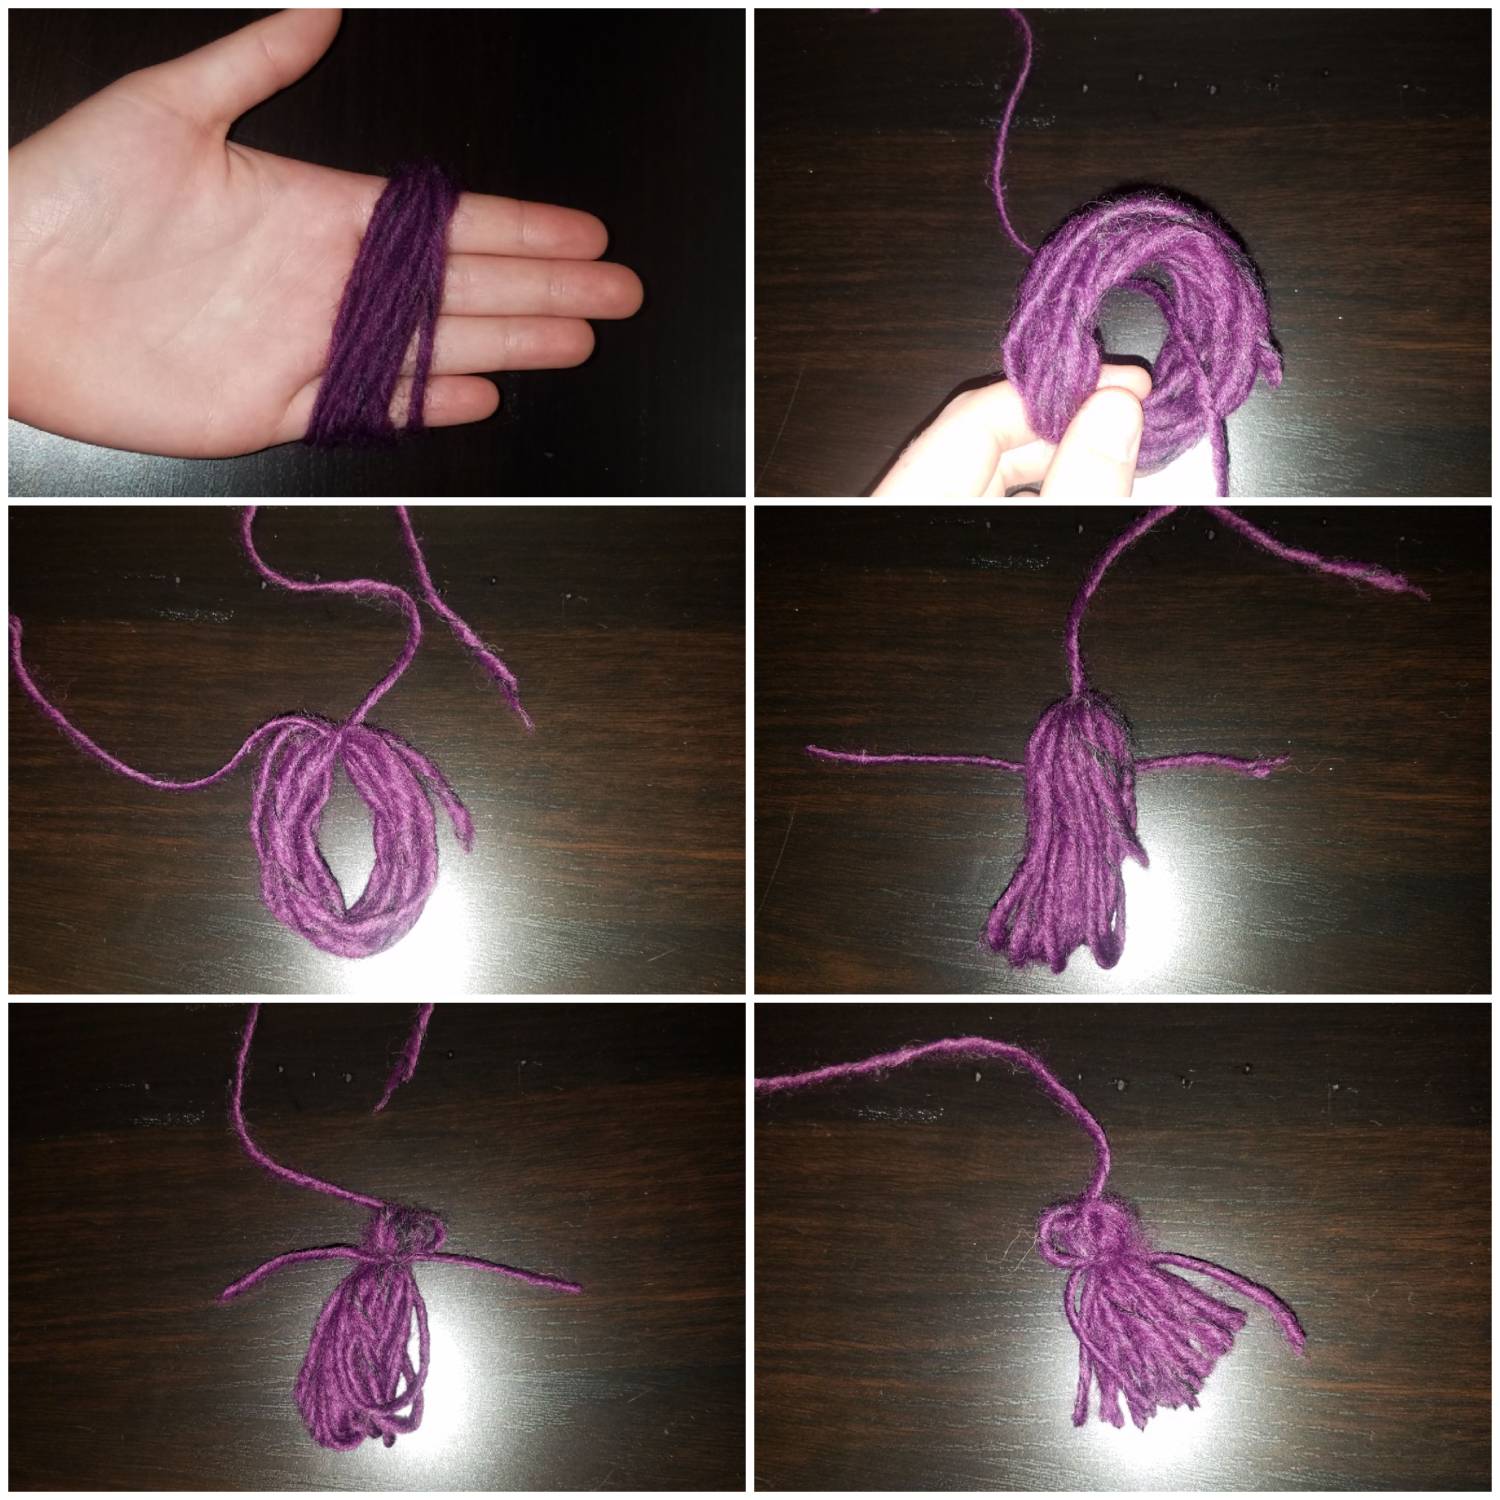 6 steps to making a tassel tail: gather short pieces of equal-length string into a group, fold in half at the middle, tie the folded area with another piece of string, wrap a loose piece around the fold near the knot and tie, then trim to make it all even 